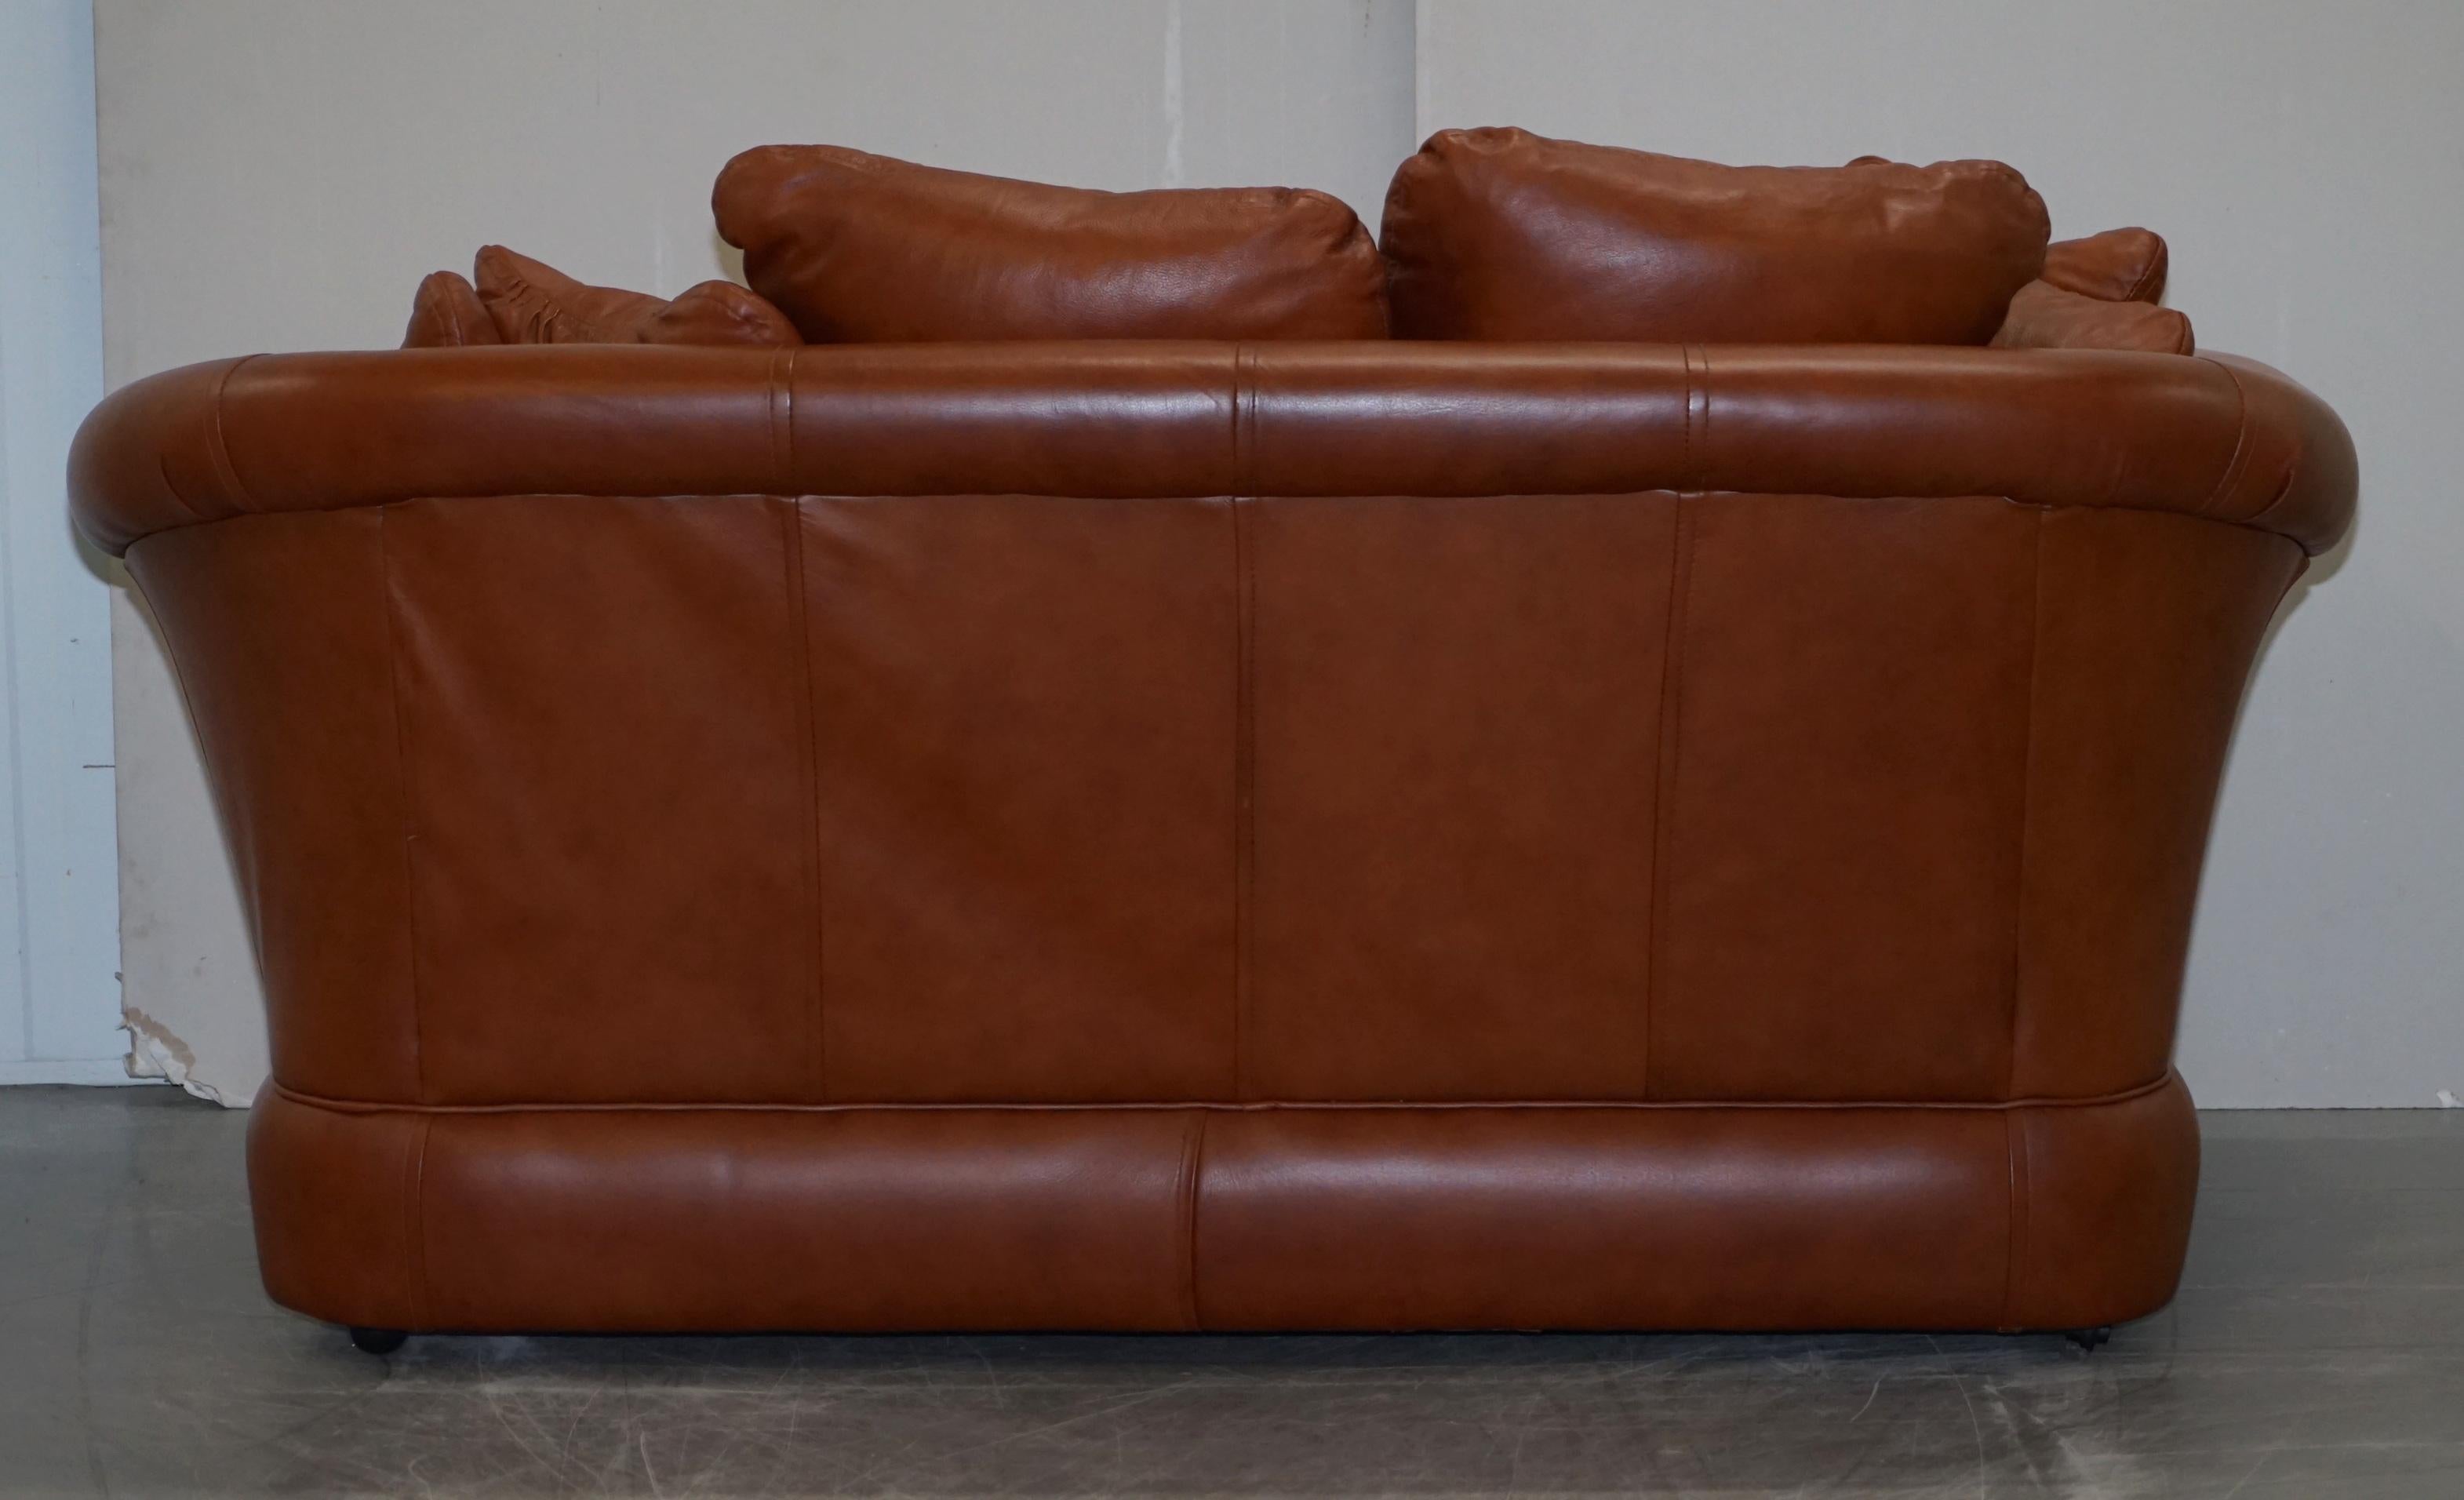 20th Century Lovely Small Aged Tan Brown Leather Sofa and Matching Armchair Two-Piece Suite For Sale